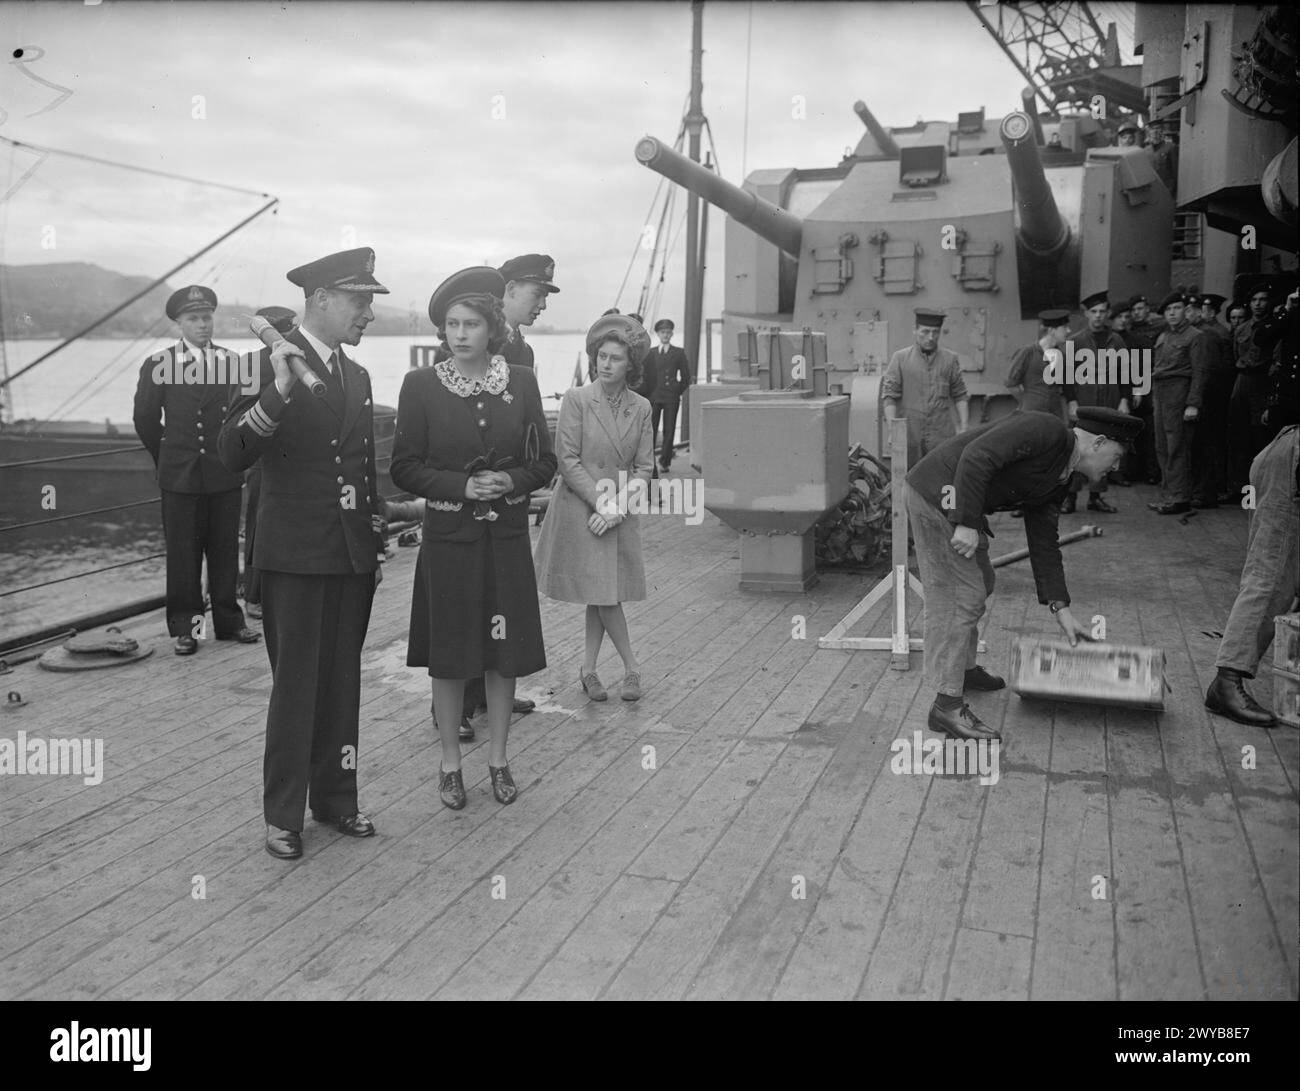 ROYAL VISIT TO HMS KING GEORGE V. 29 OCTOBER 1944, GREENOCK. THE KING AND QUEEN ACCOMPANIED BY PRINCESS ELIZABETH AND PRINCESS MARGARET PAID A FAREWELL VISIT TO THE BATTLESHIP HMS KING GEORGE V BEFORE SHE LEFT TO JOIN BRITAIN'S EAST INDIES FLEET. - Commander J G Long, RN, KING GEORGE V's Commander, explaining the routine of ammunitioning to Princess Elizabeth. , Stock Photo